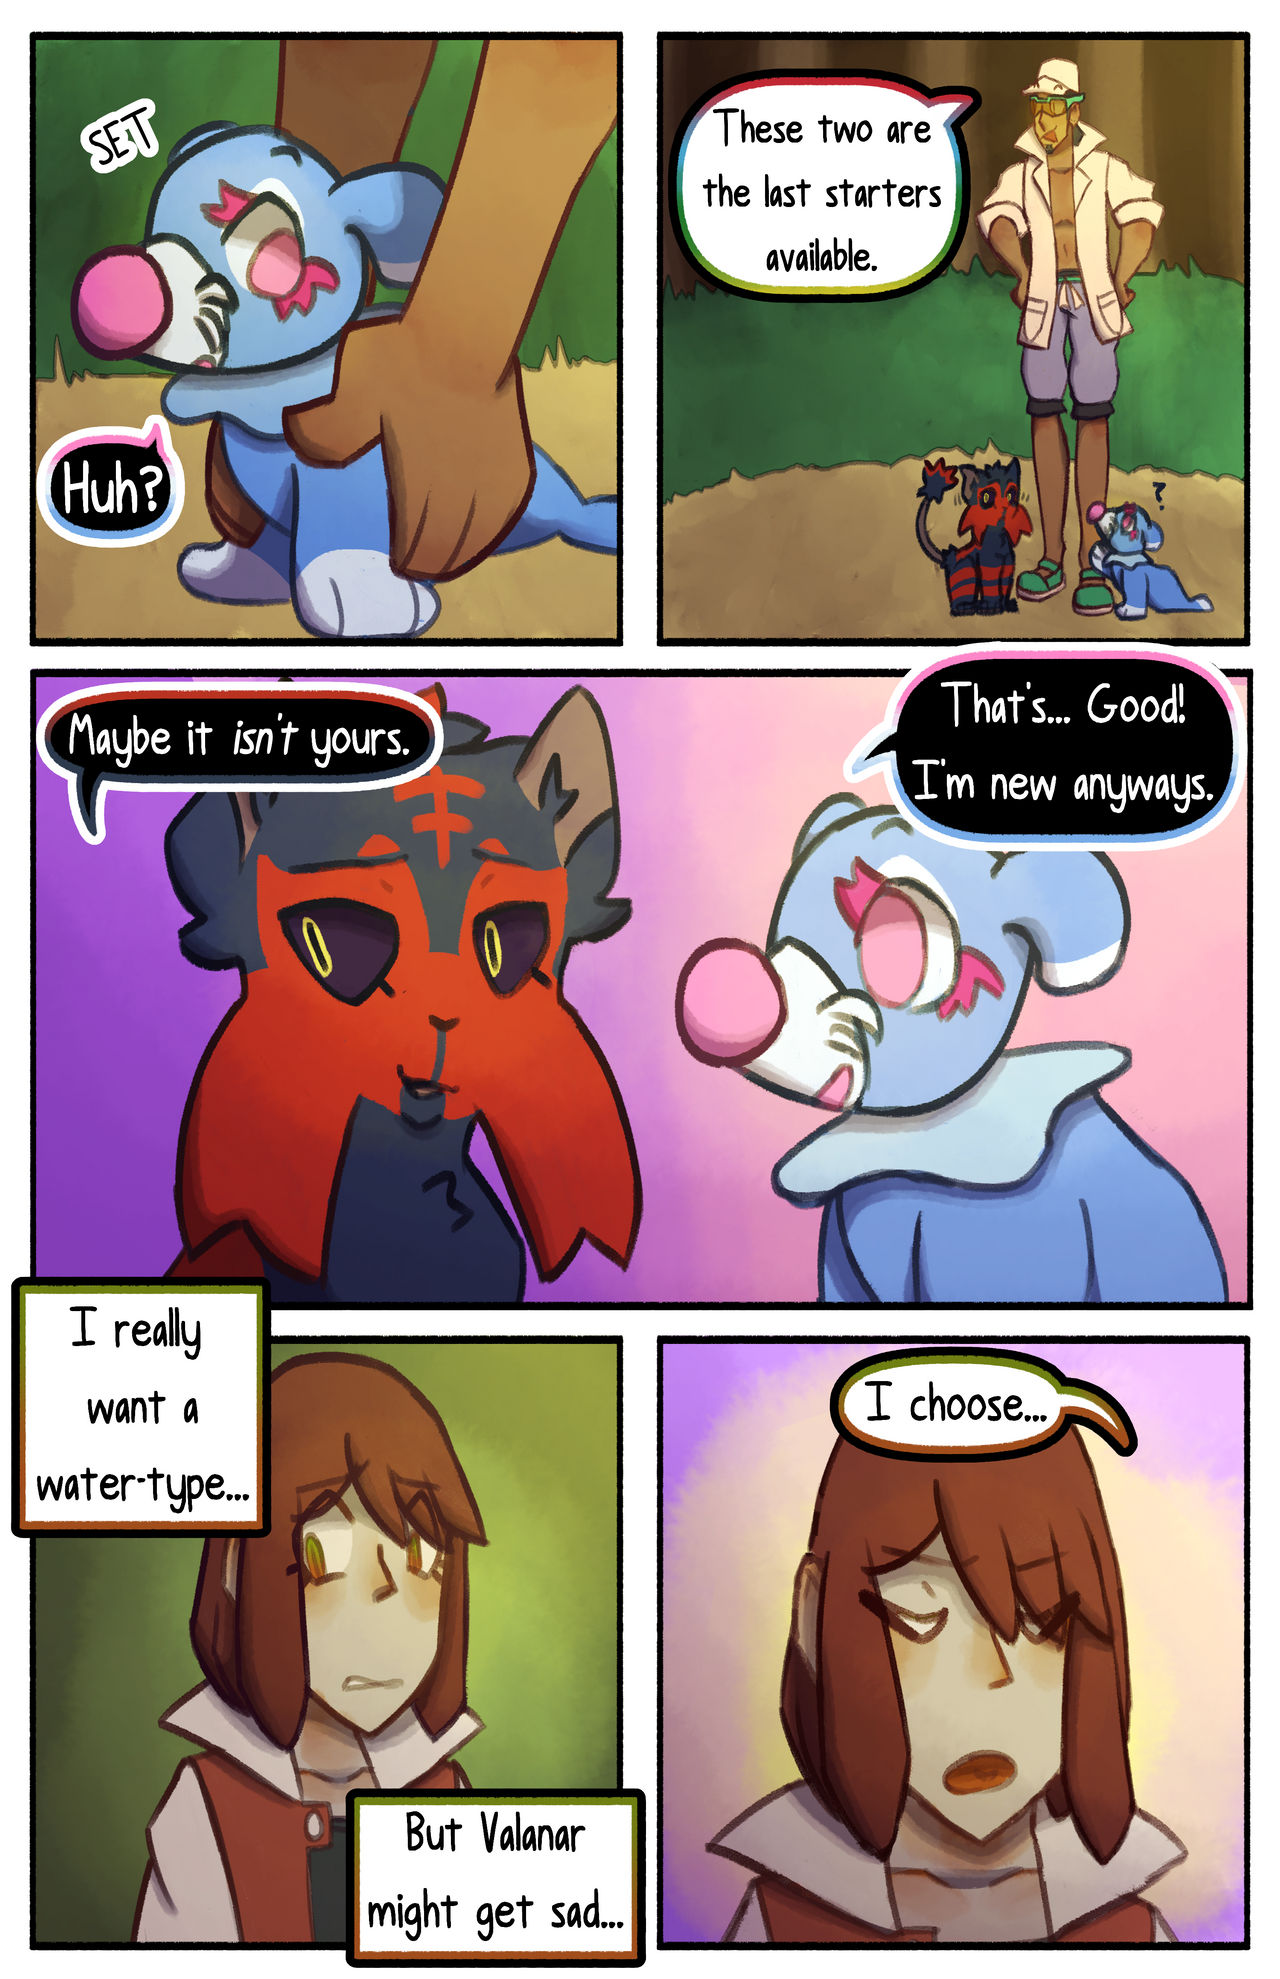 bloom__an_ultra_moon_nuzlocke___chapter_1__page_20_by_zombie_zcorge_df7mw9y-fullview.jpg